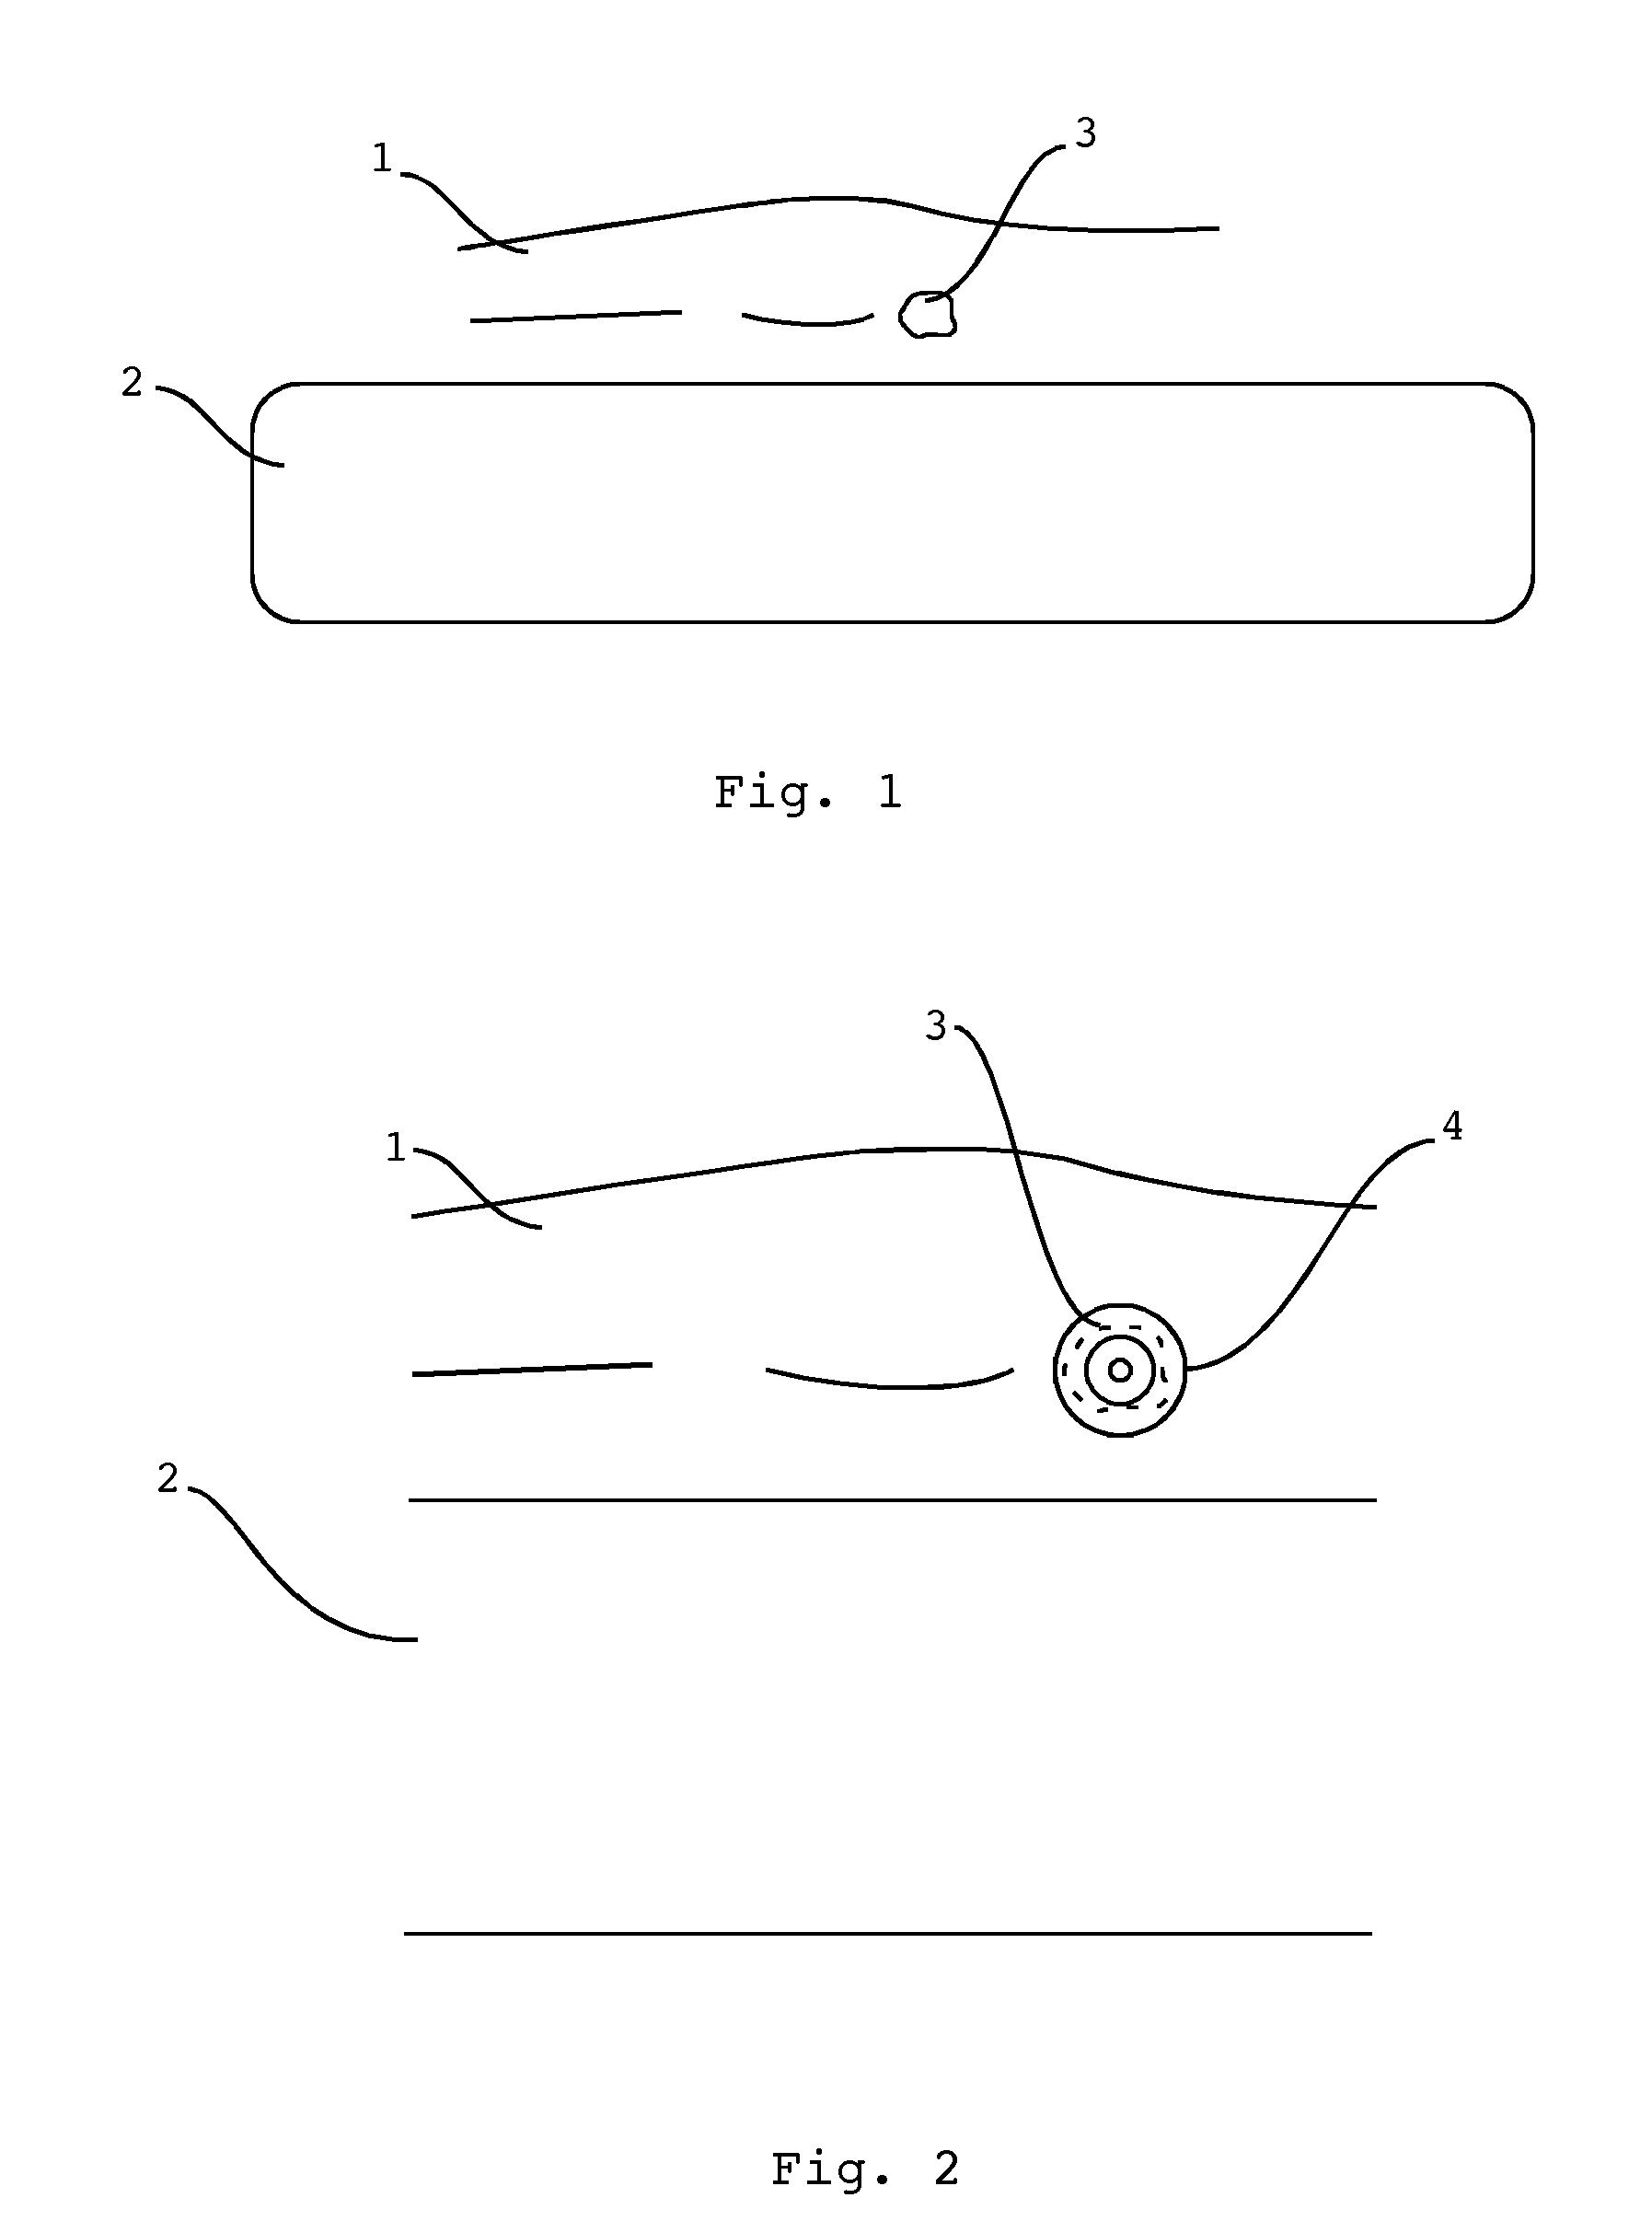 Method for preventing or treating pressure sores